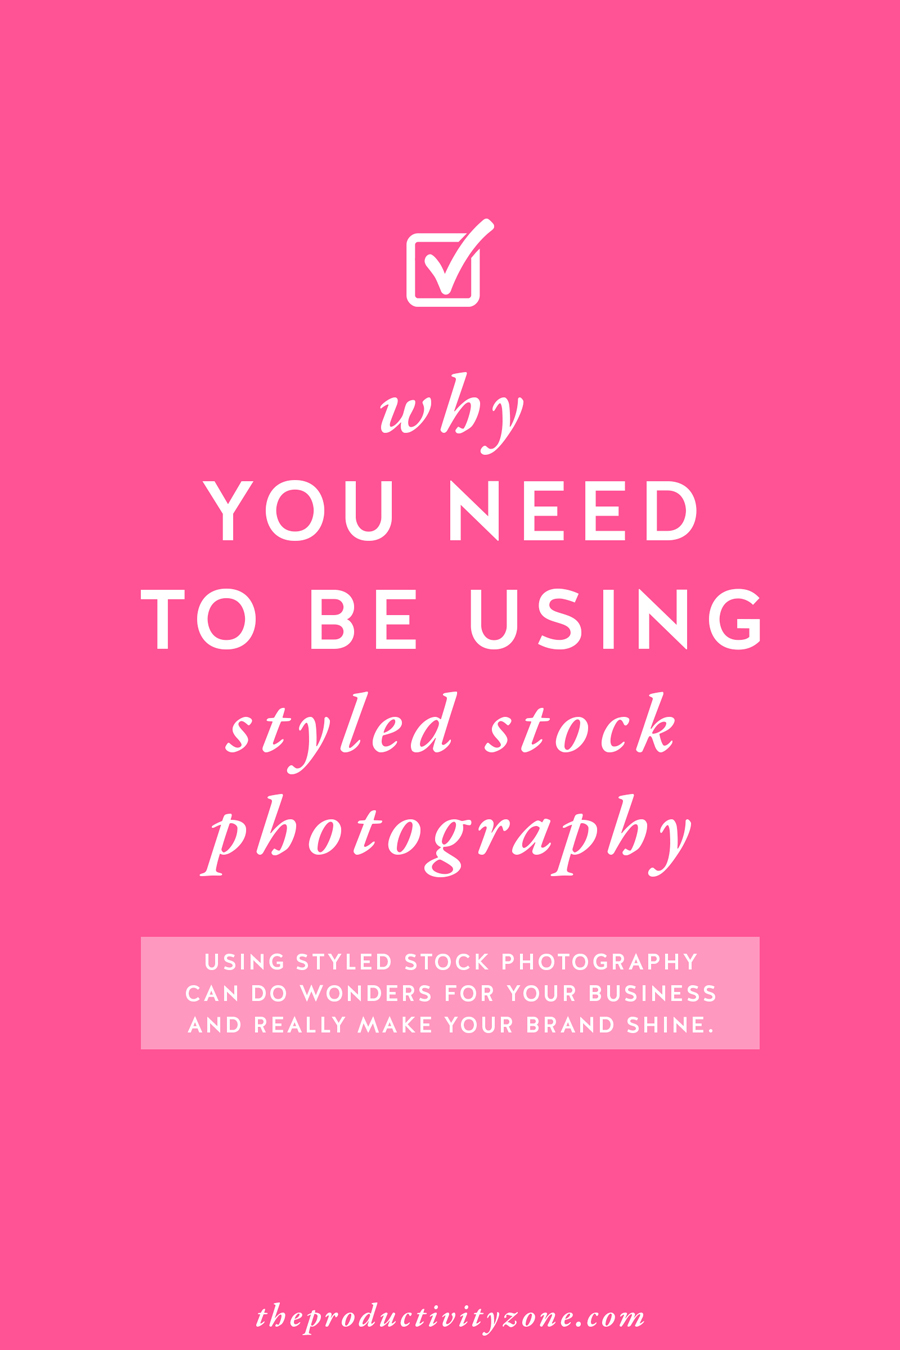 Not using styled stock photography in your business yet? Here are 5 impressive reasons why you should be on The Productivity Zone!!